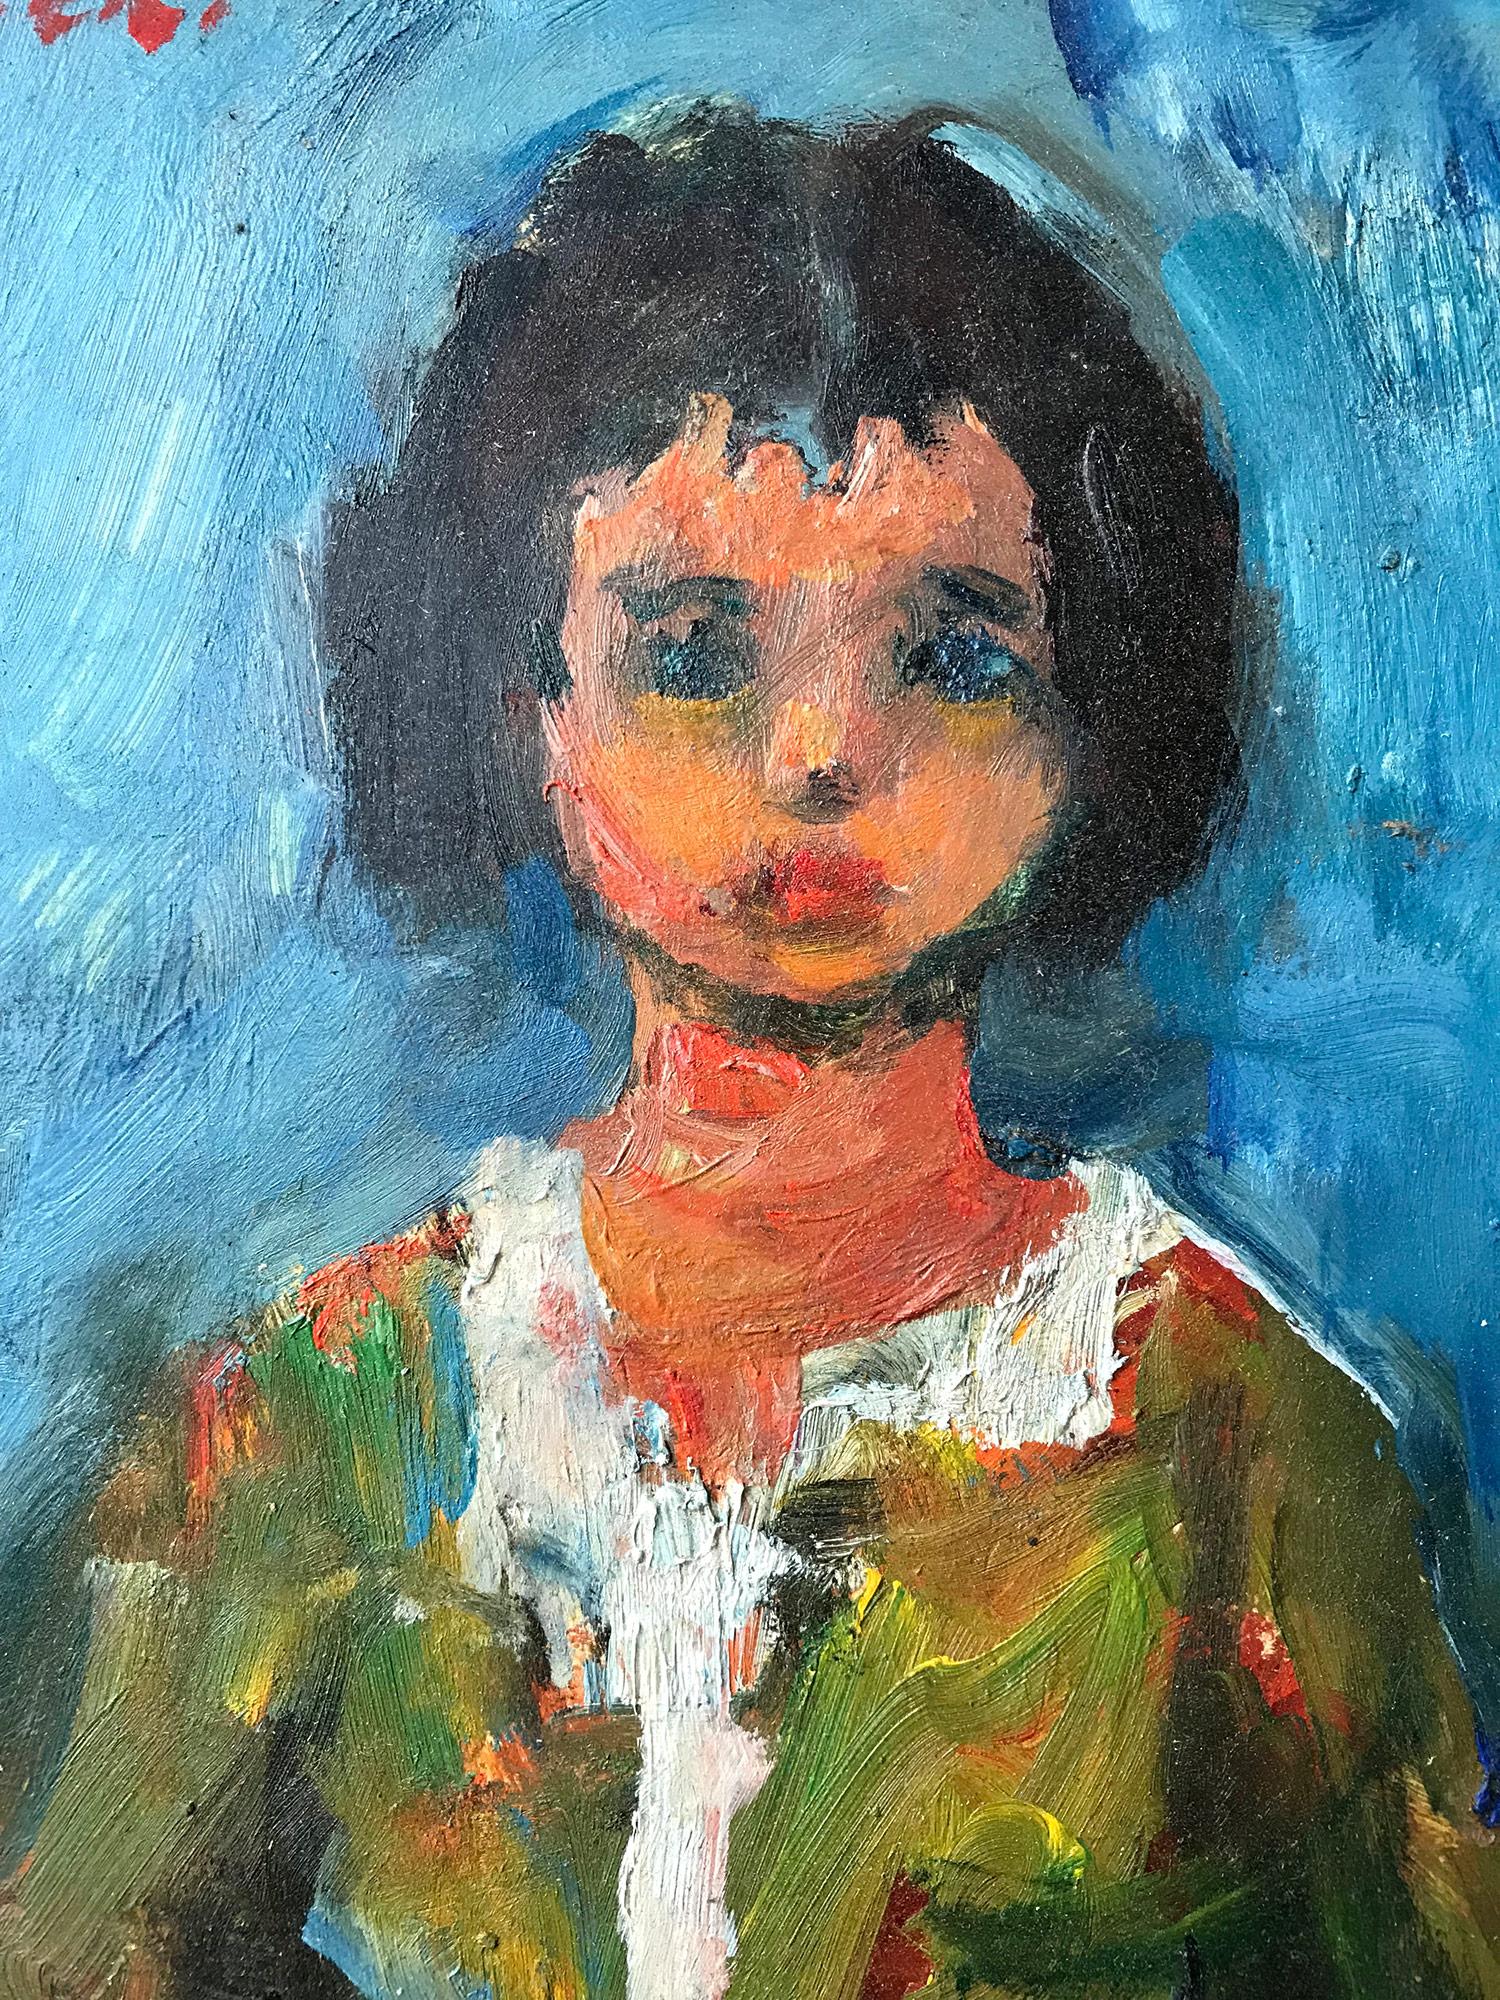 This painting depicts a whimsical portrait of a young girl with dark hair against an ultramarine blue background. The bright colors and quick brush strokes are what make this painting so attractive and desirable. The piece is done in a highly